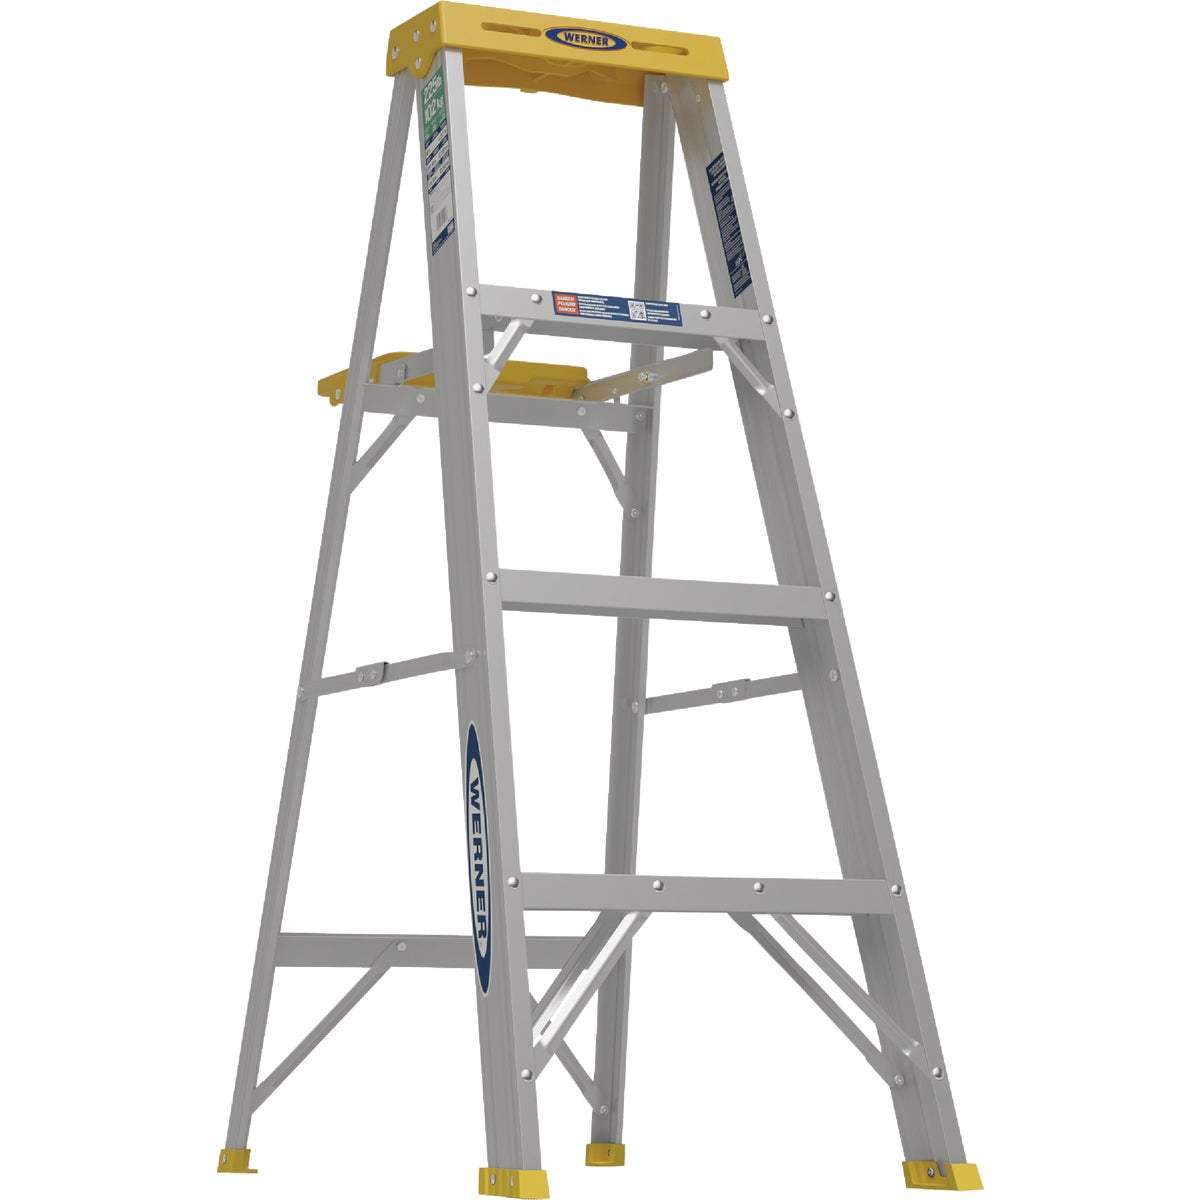 Werner 4 Ft. Aluminum Step Ladder with 225 Lb. Load Capacity Type II Ladder Rating